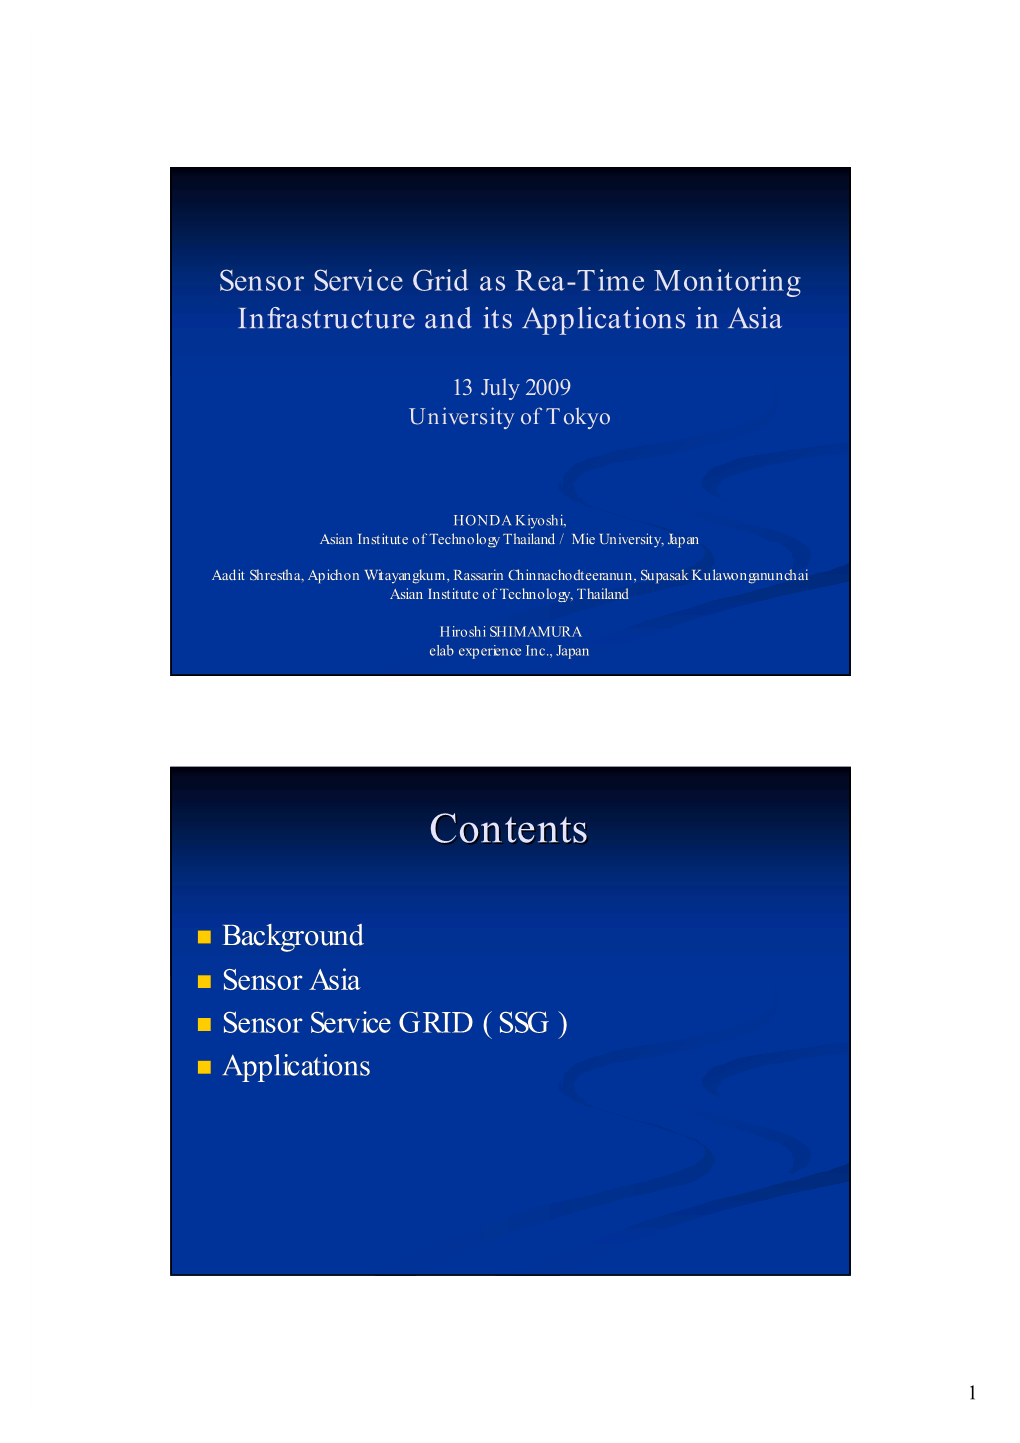 Sensor Service Grid As Rea-Time Monitoring Infrastructure and Its Applications in Asia